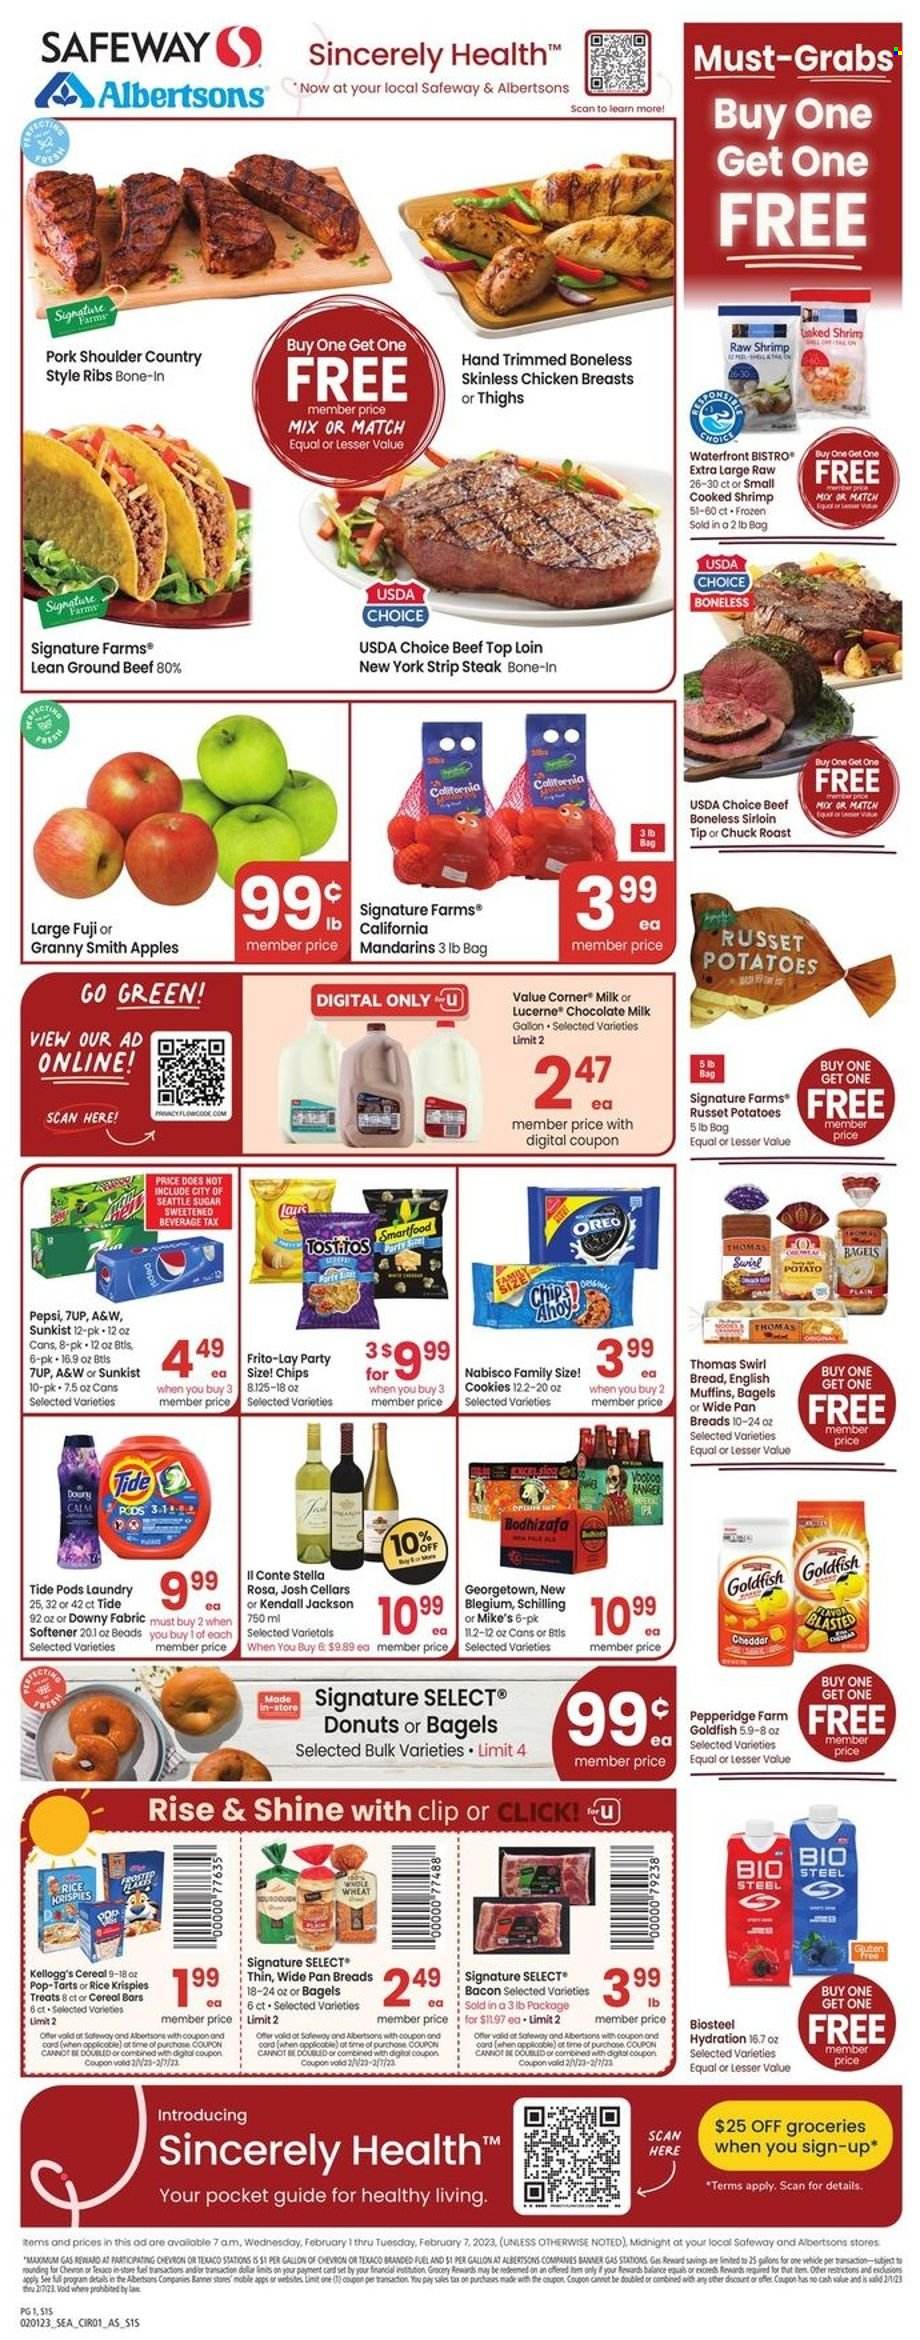 thumbnail - Safeway Flyer - 02/01/2023 - 02/07/2023 - Sales products - bagels, english muffins, donut, russet potatoes, potatoes, apples, mandarines, Granny Smith, chicken breasts, beef meat, ground beef, steak, chuck roast, striploin steak, ribs, pork meat, pork ribs, pork shoulder, country style ribs, shrimps, bacon, cheese, Oreo, milk, cookies, milk chocolate, chocolate, cereal bar, Kellogg's, Pop-Tarts, Smartfood, Goldfish, Frito-Lay, sugar, Rice Krispies, Pepsi, 7UP, A&W, Tide, fabric softener, Downy Laundry, pan, vehicle. Page 1.